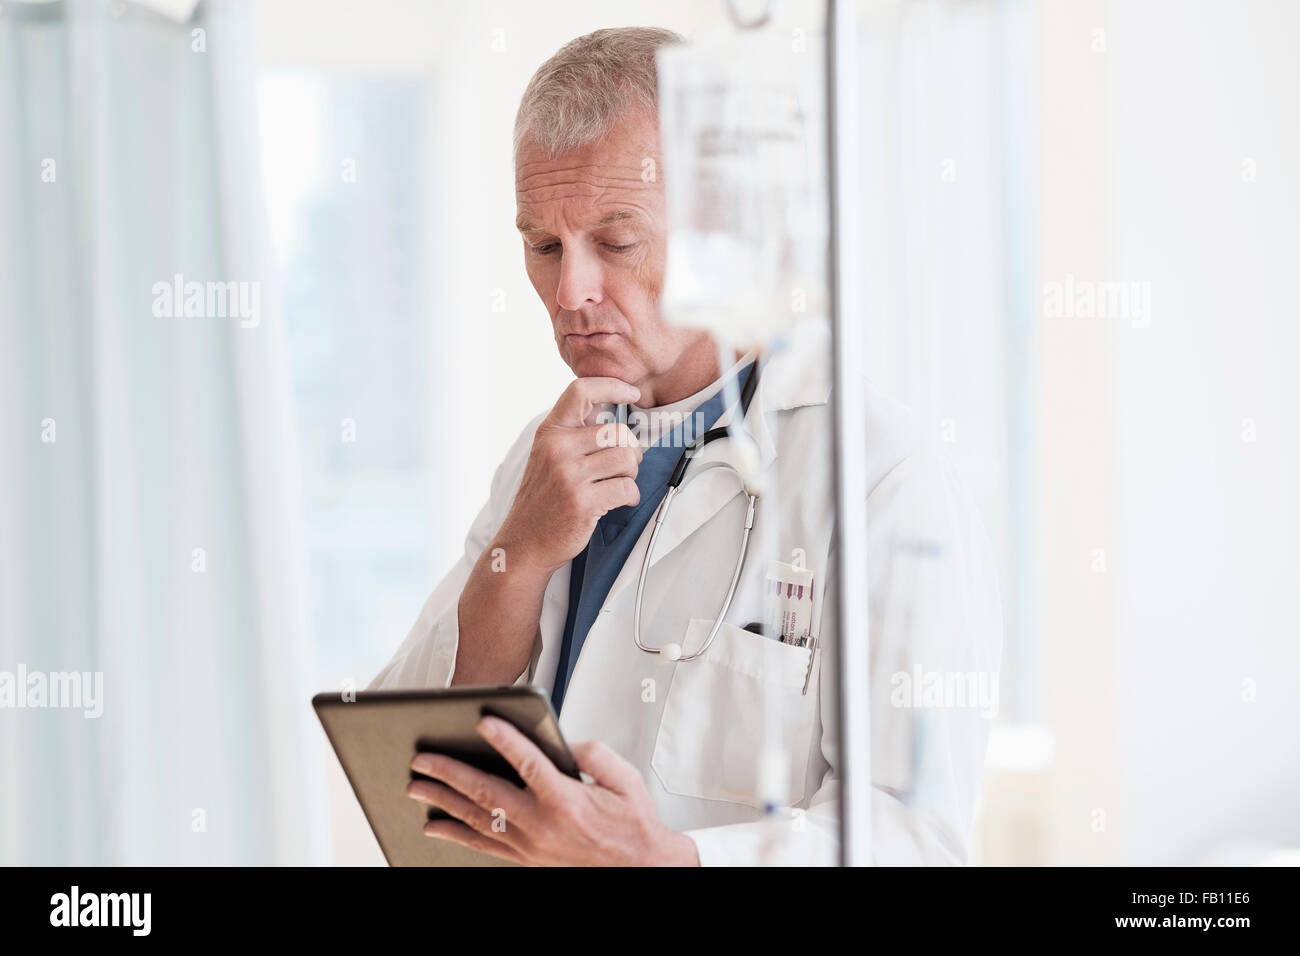 Doctor using tablet in hospital Stock Photo